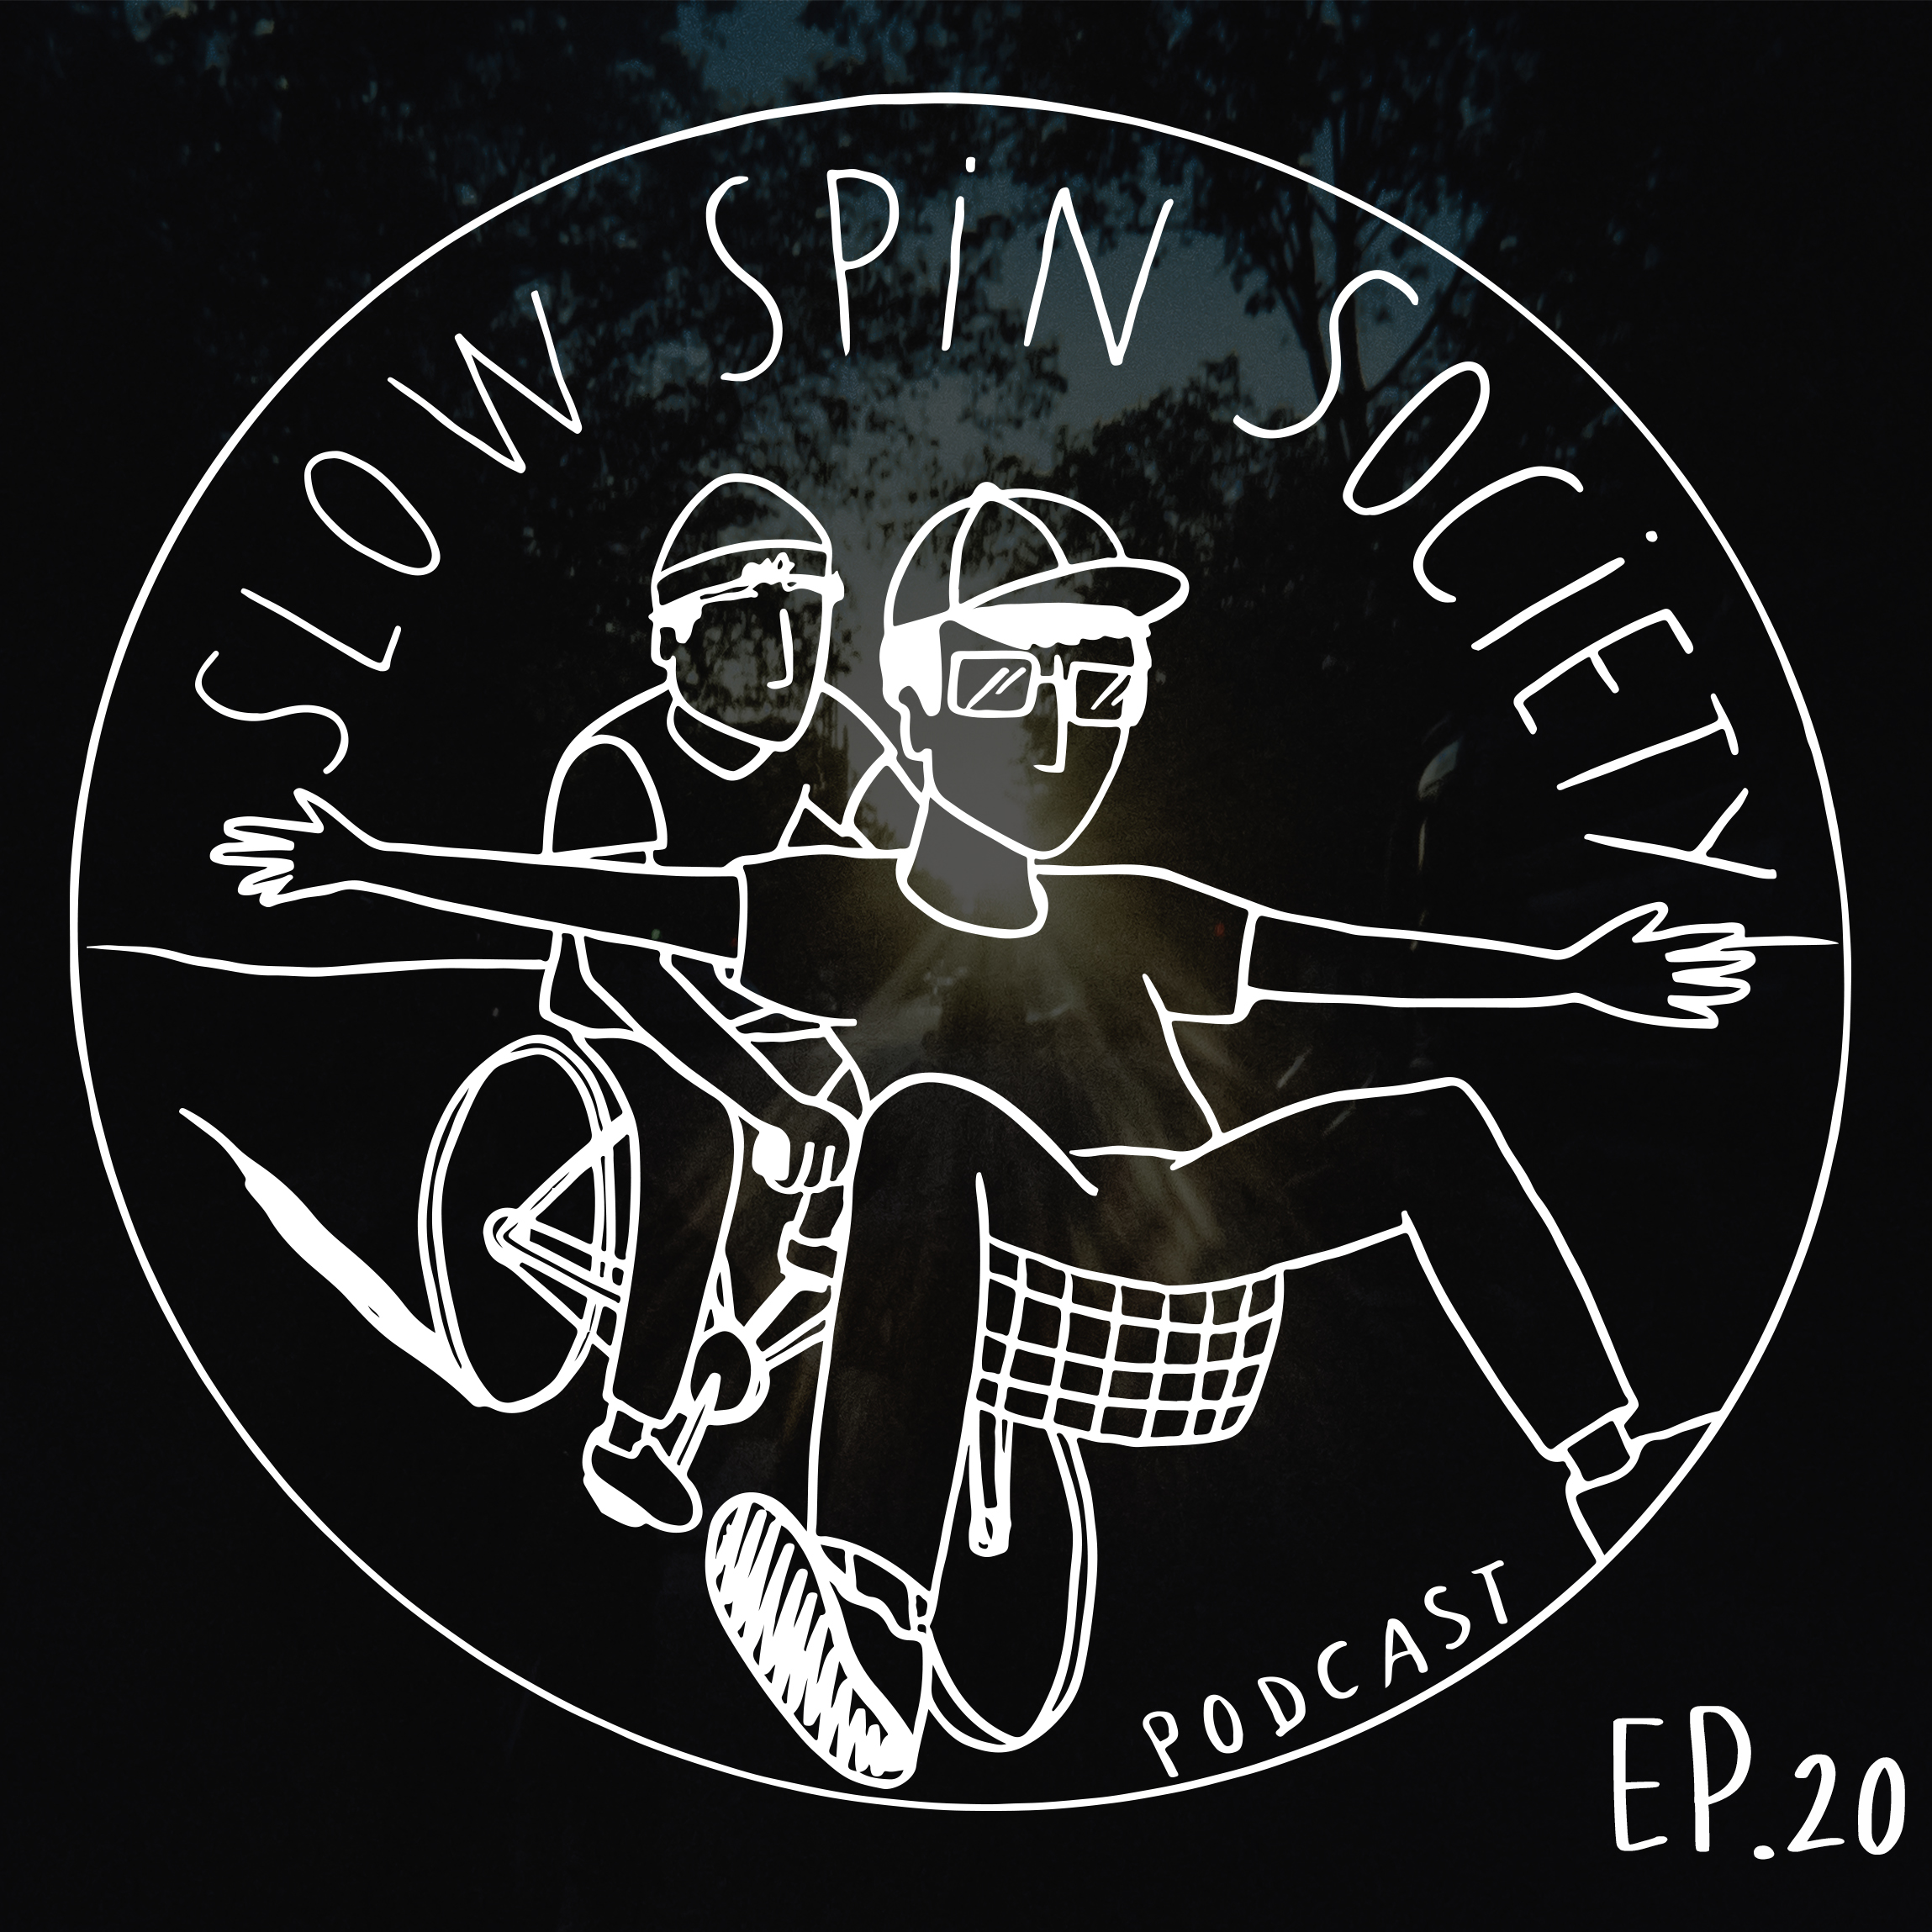 The Slow Spin Society Podcast Ep.20 : Best drivetrain? Dream bike? Biggest waste of money? Answering your questions! (Q&A)